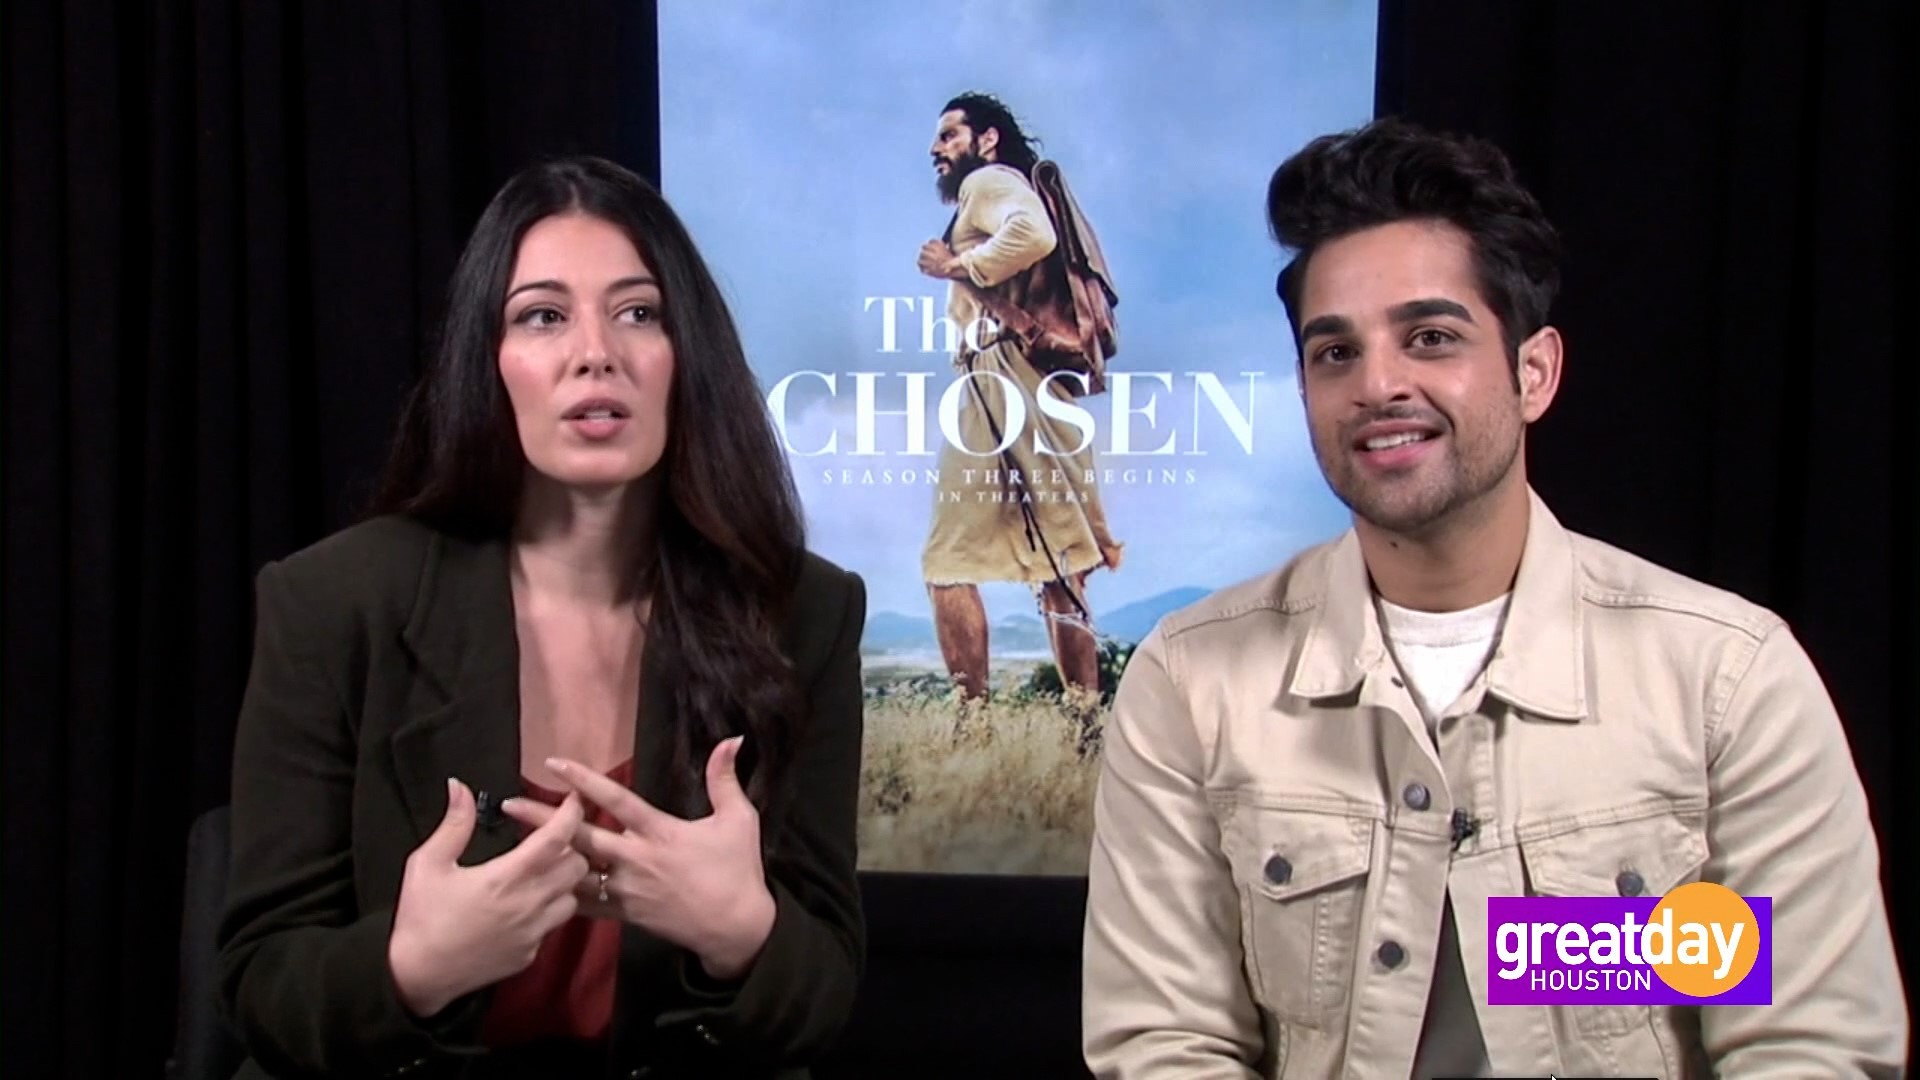 Fan favorites, Elizabeth Tabish (Mary Magdalene) and Paras Patel (Matthew) share more on what we can expect in season 3.